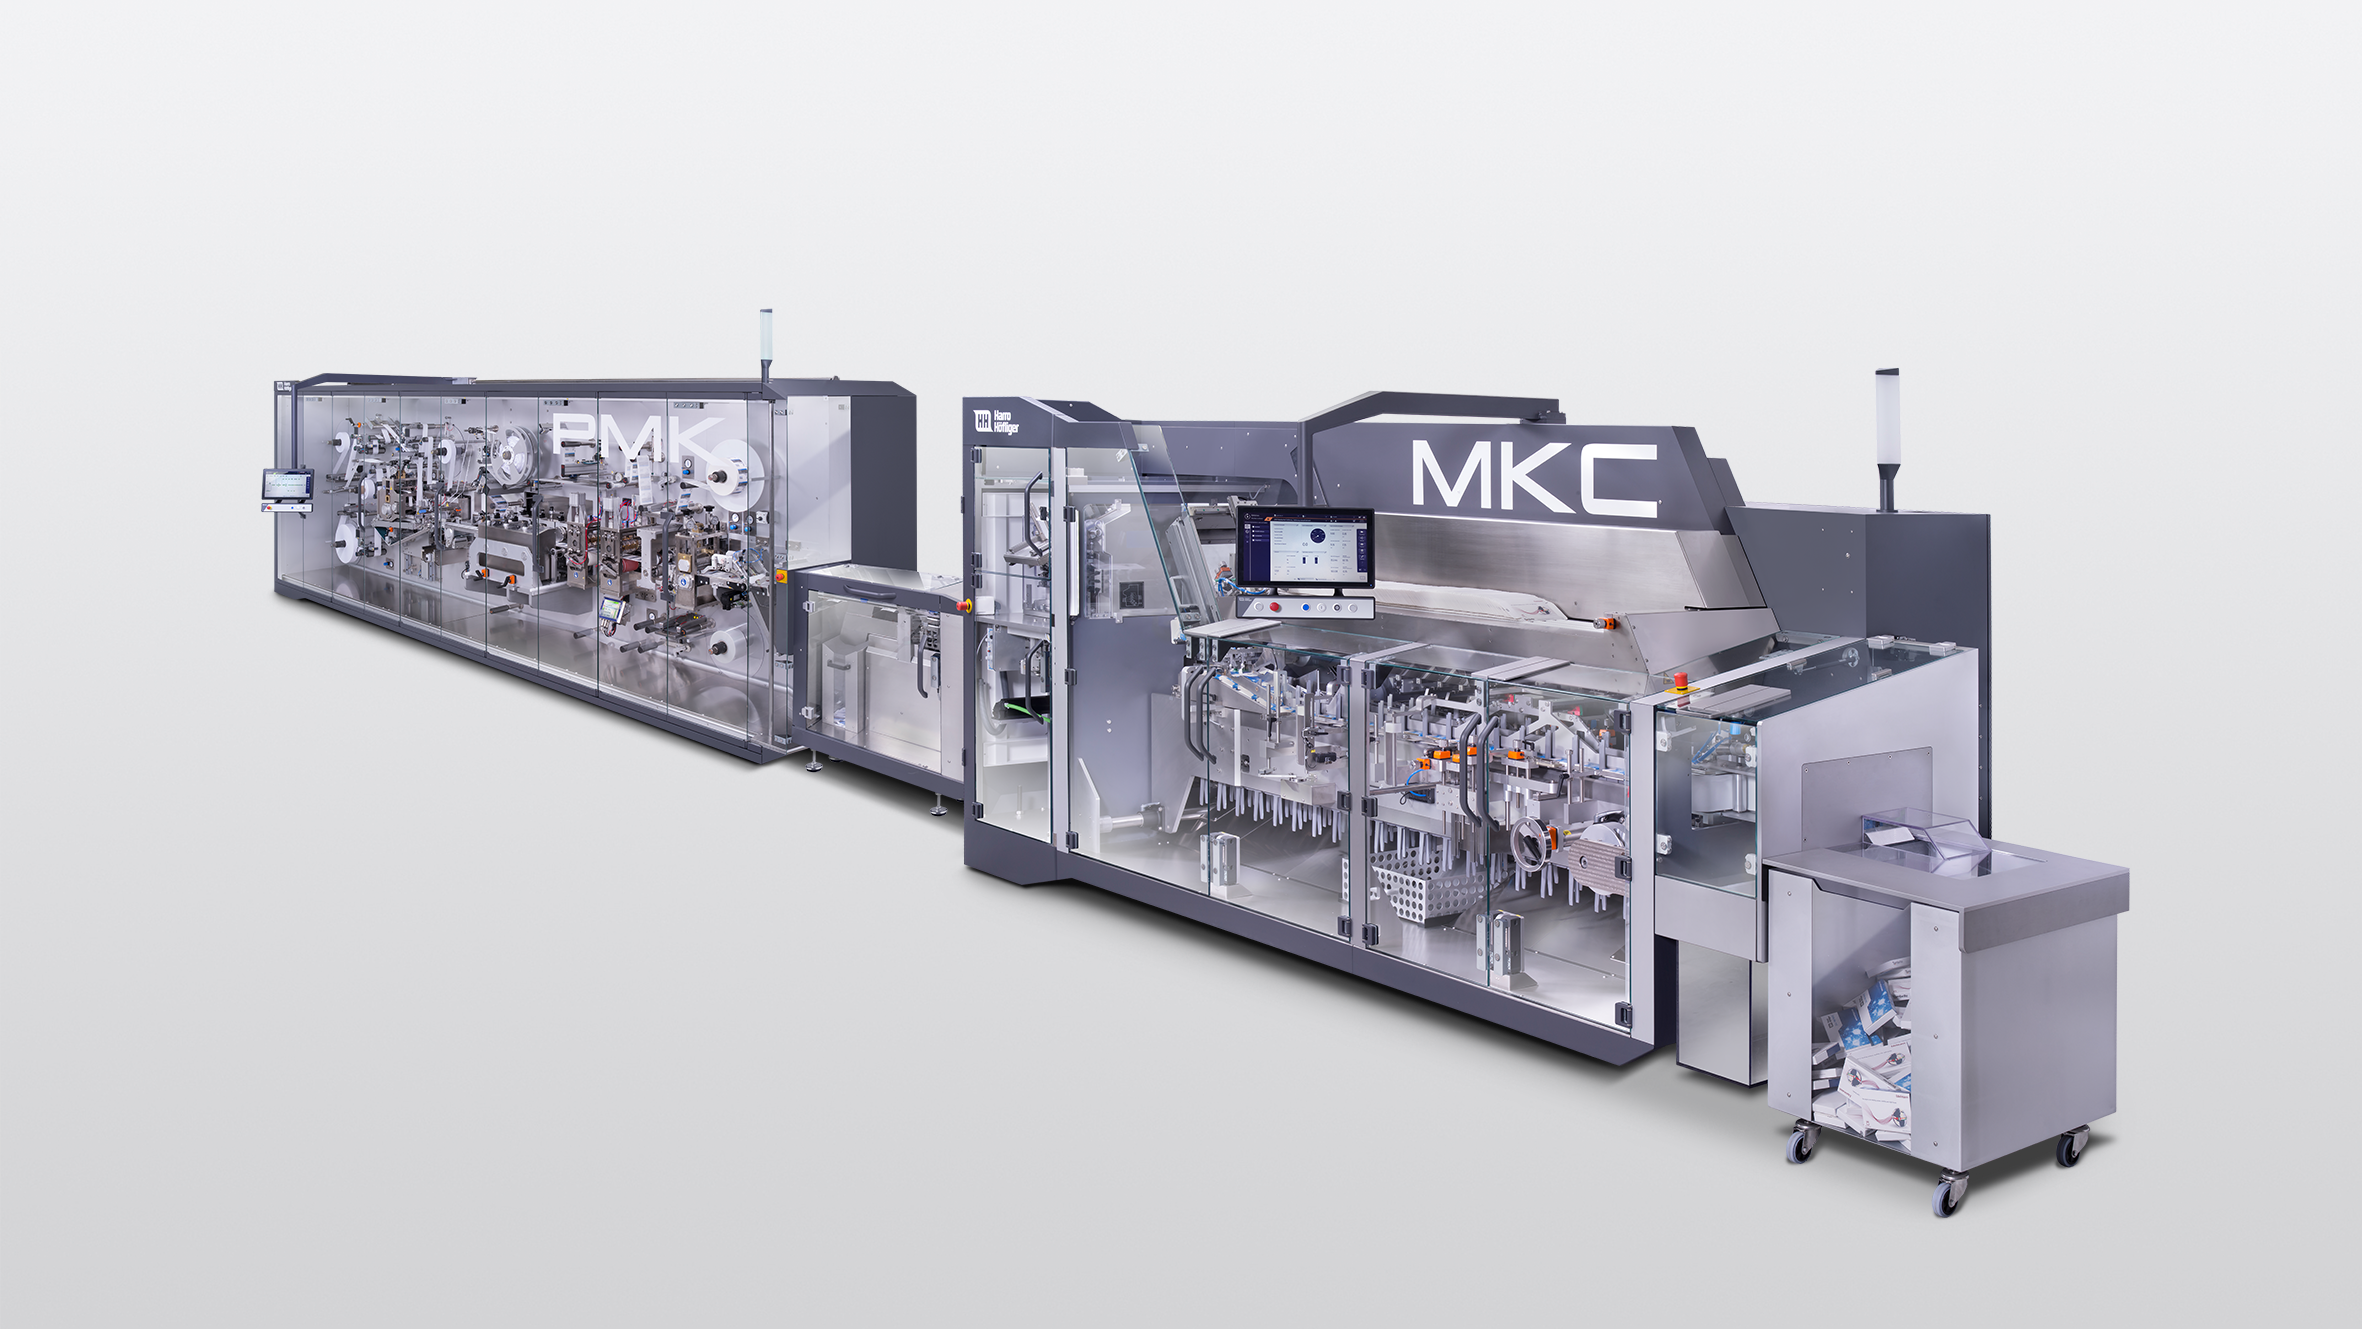 The PMK web processing machine is used to manufacture products for classic and modern wound care. These are packed with the MKC cartoner. Both machines represent the company's new corporate machine design. Harro Höfliger - pharmaceutical industry - packaging industry - packaging machine - PMK - MKC - designship GmbH - product design - industrial design - machine design - interface design - iF world design index - Top 25 Industry - Top 100 design studios worldwide - we love design